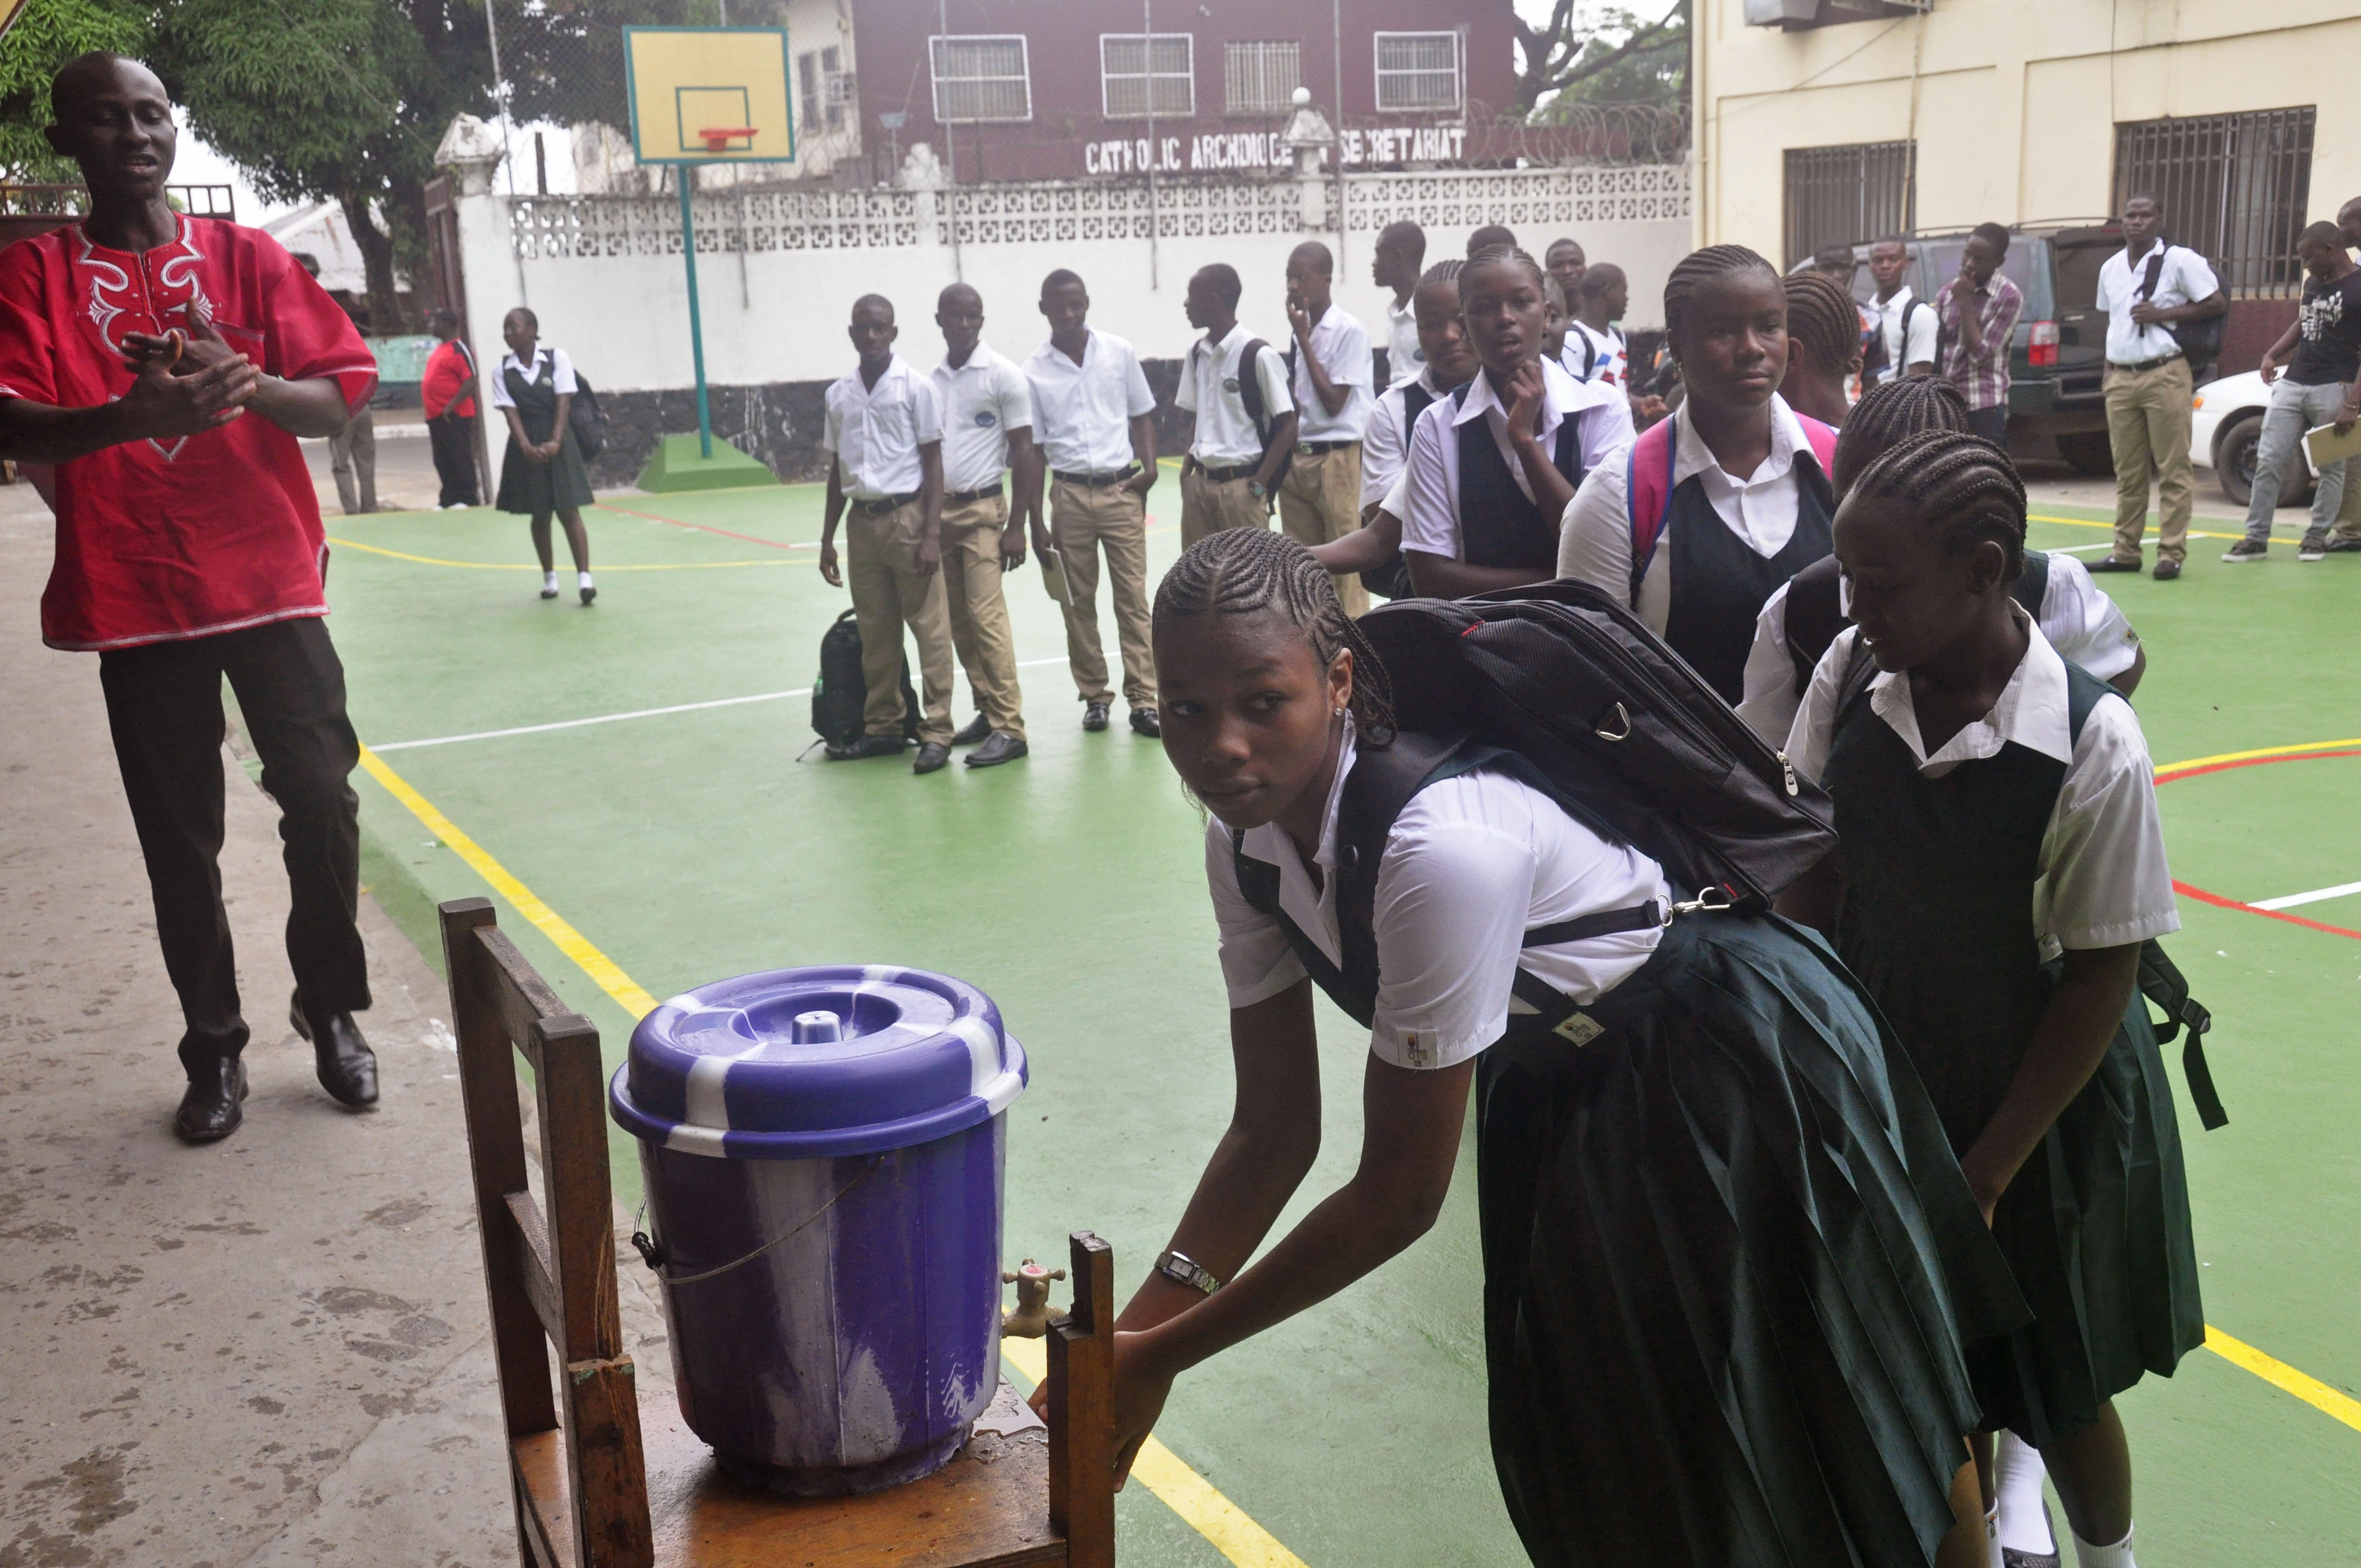 Liberian school children wash their hands before entering their classrooms as part of the Ebola prevention measures at Cathedral High School as students arrive in the morning to attend class in Monrovia, Liberia, Feb. 16, 2015. (Abbas Dulleh—AP)